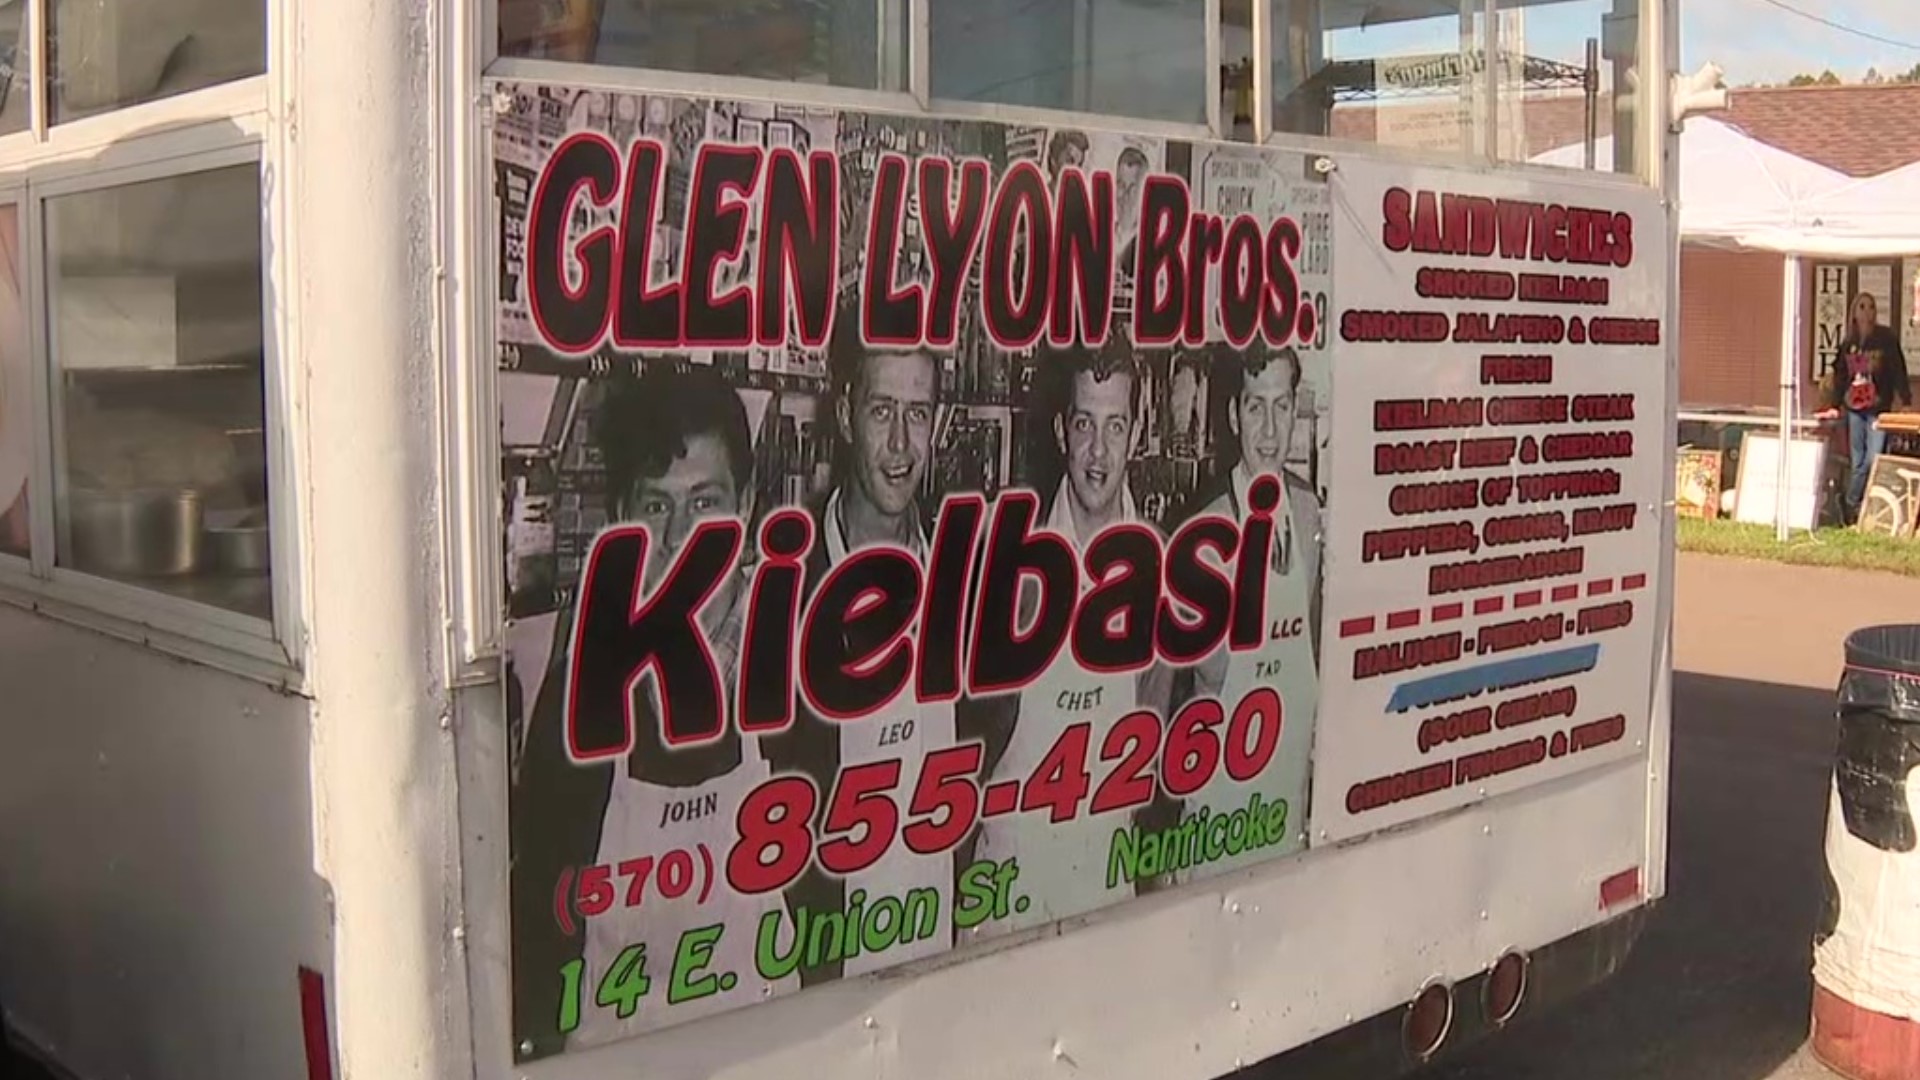 A kielbasi shop caught fire Wednesday morning as the business owner was preparing food for his stand at the Bloomsburg Fair.